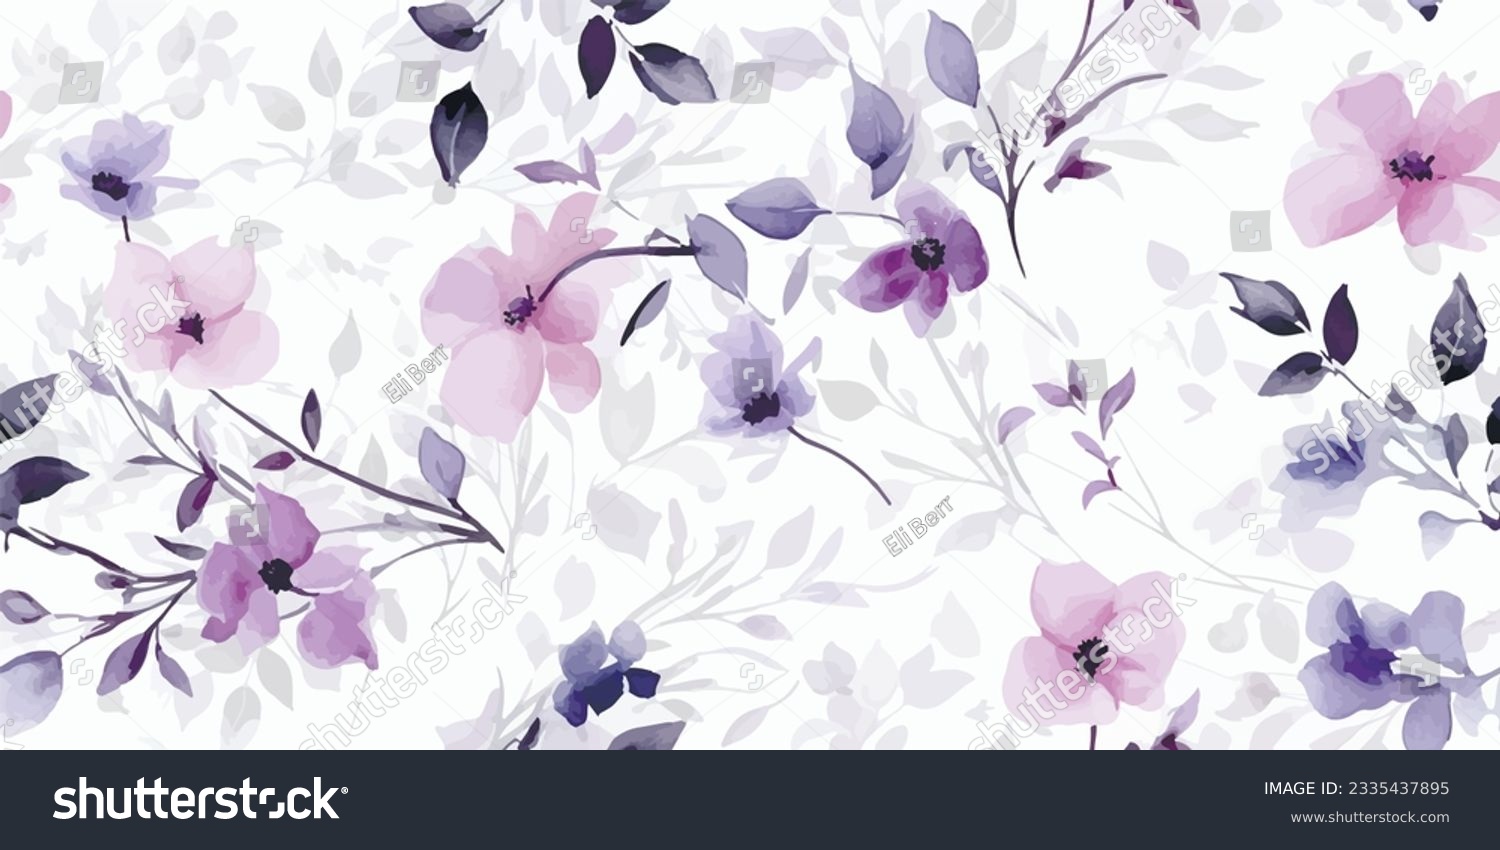 SVG of Flower seamless pattern with abstract floral branches with leaves, blossom lilac pink pastel flowers. Vector nature illustration in vintage watercolor style on light white background svg